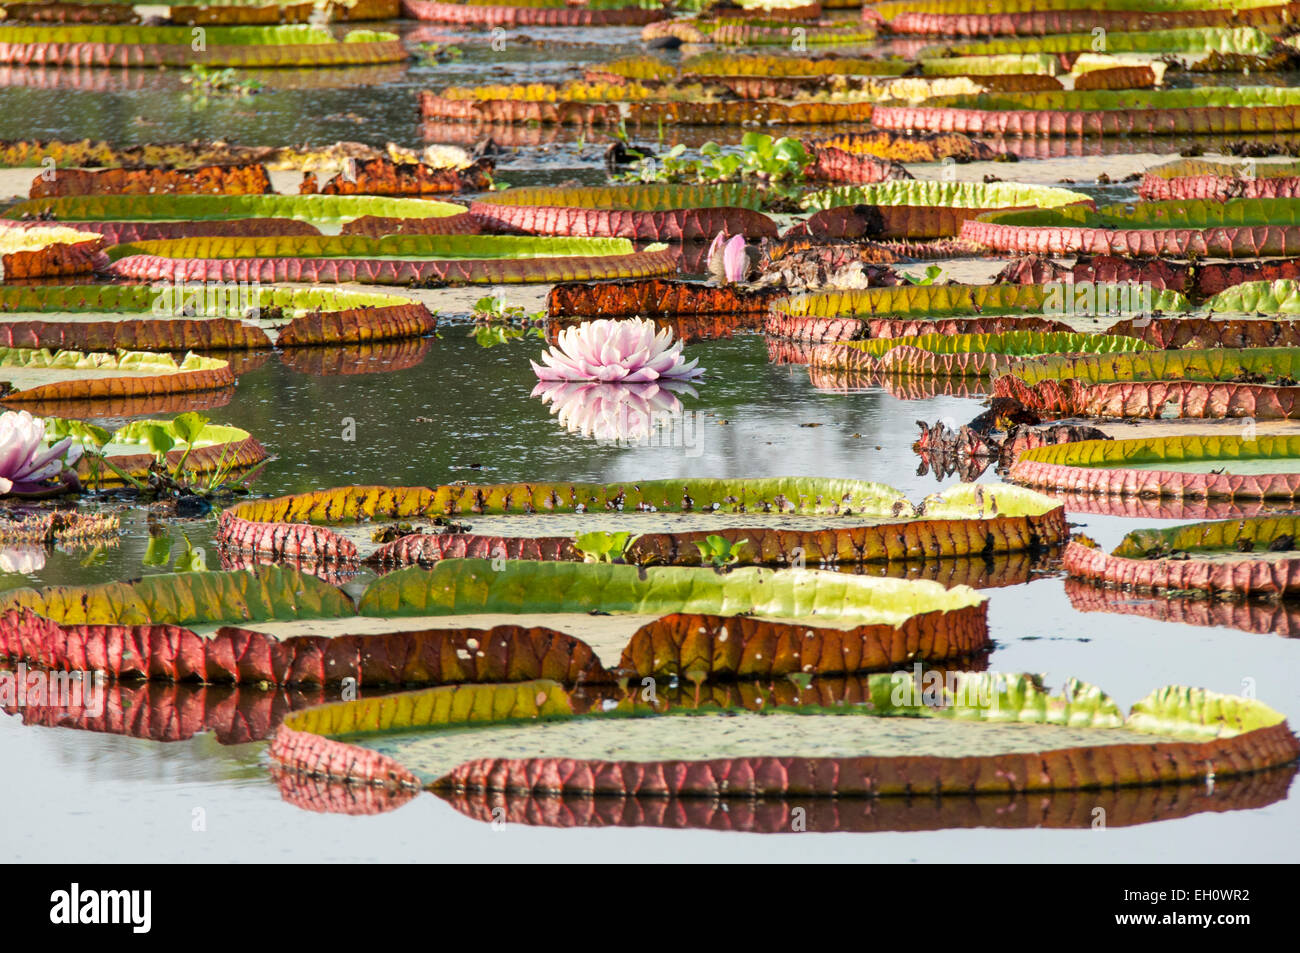 Giant Waterlilies, Victoria Amazonica, formerly called Victoria Regia, Panantal, Mato Grosso, Brazil, South America Stock Photo